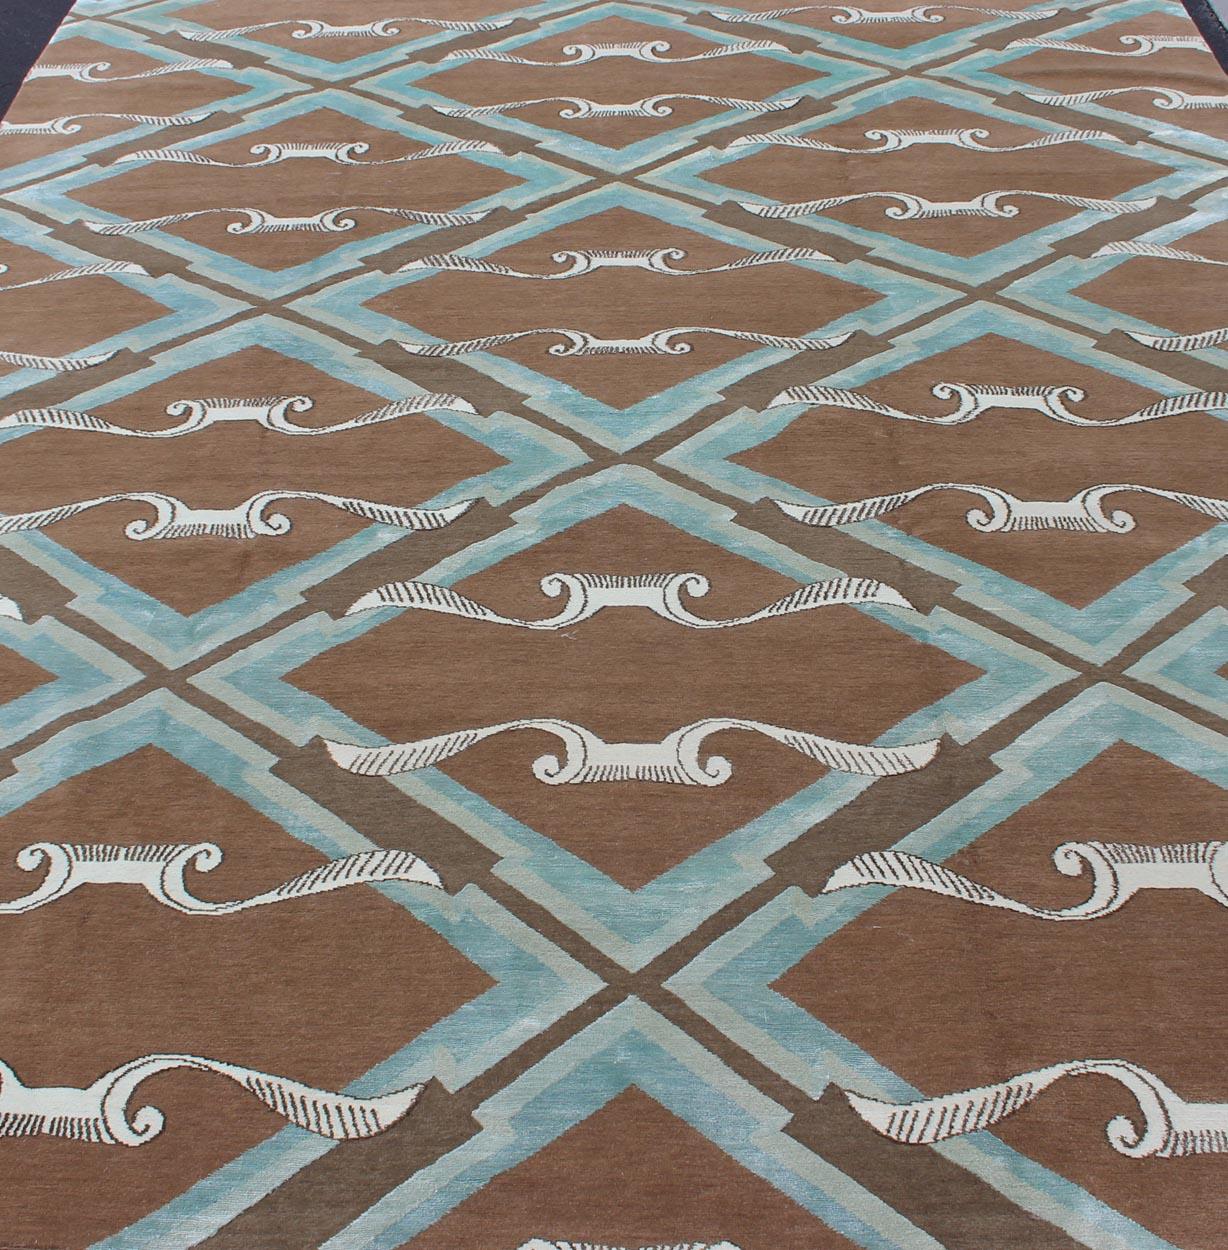 Pure Silk and Wool Nepalese Modern Design Rug in Brown, Blue and Diamond Design 4